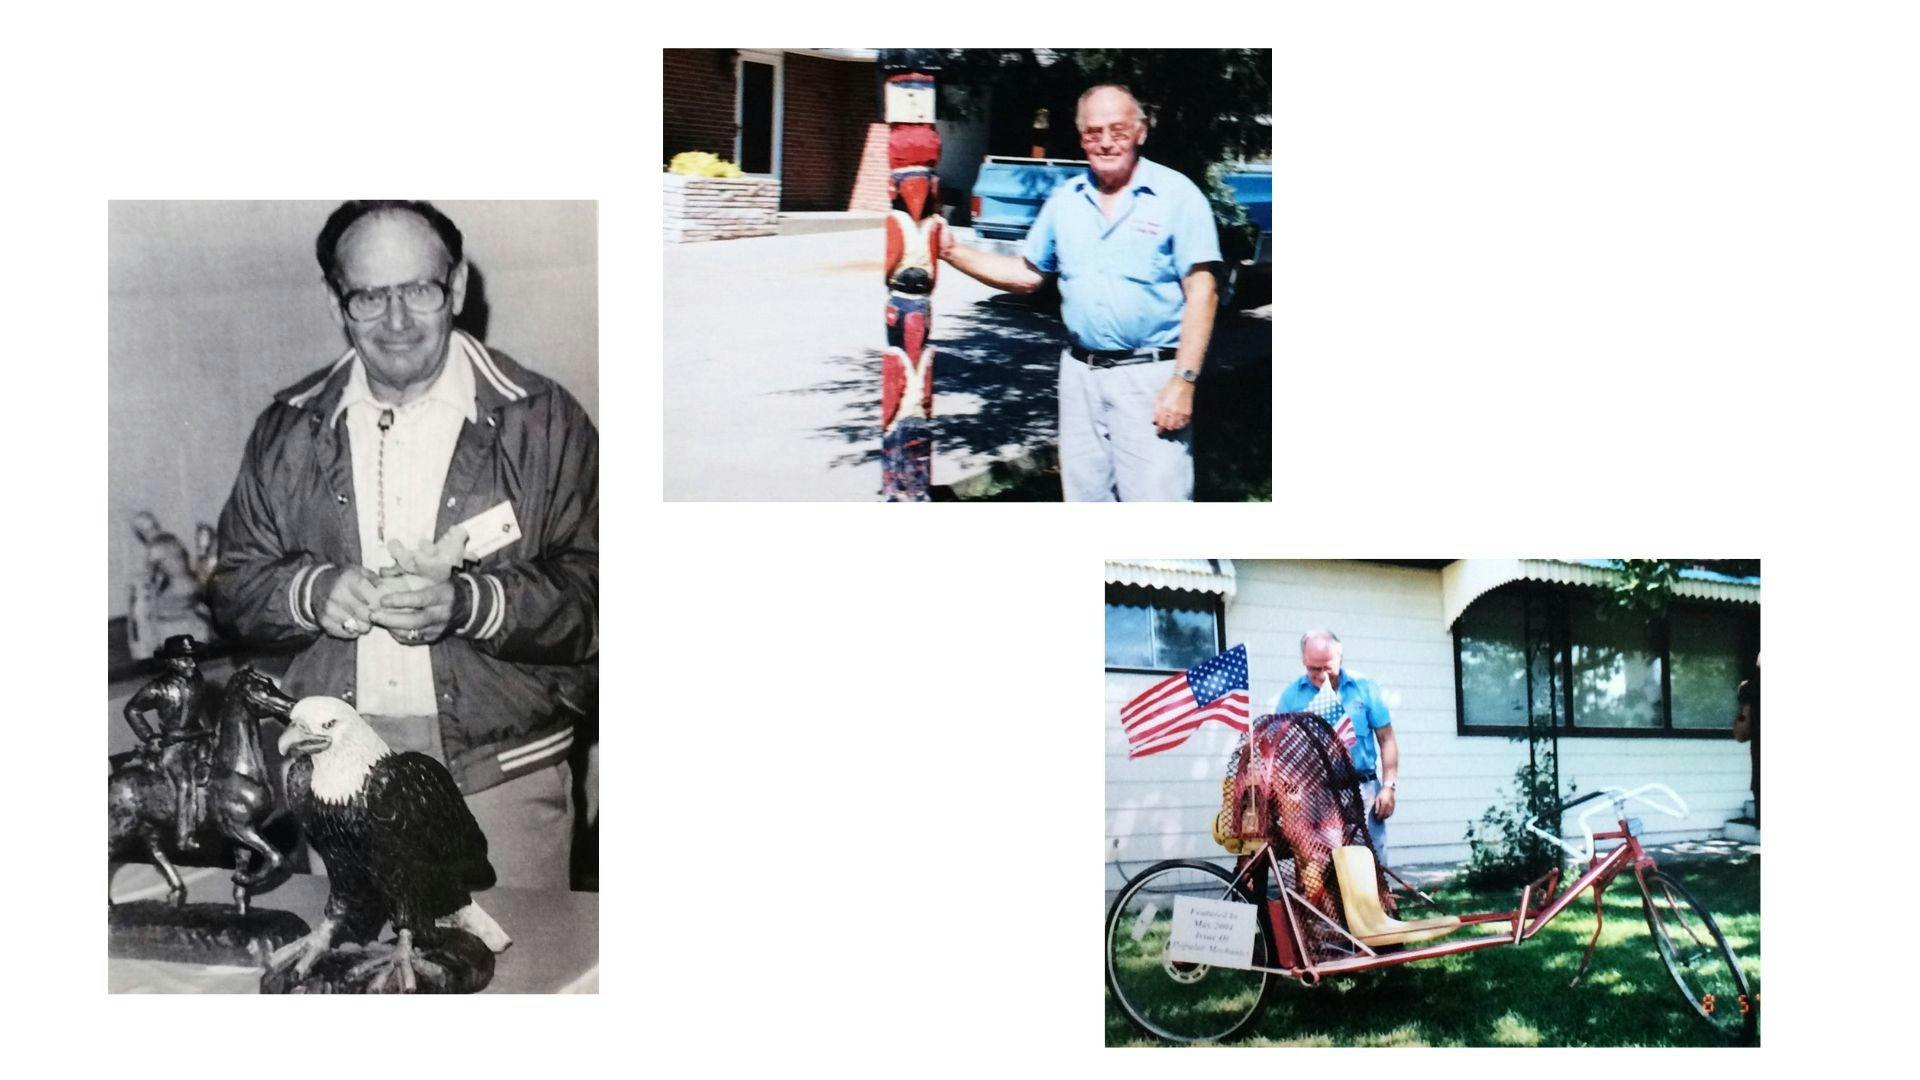 A collage of several portrait photographs of a man with a light skin tone and gray hair. In the black-and-white photo on the left, he is standing by a table with a sculpture of a man on a horse and a sculpture of an eagle. In the two color photographs on the right, he is standing near a totem pole and a bike outside of a house.